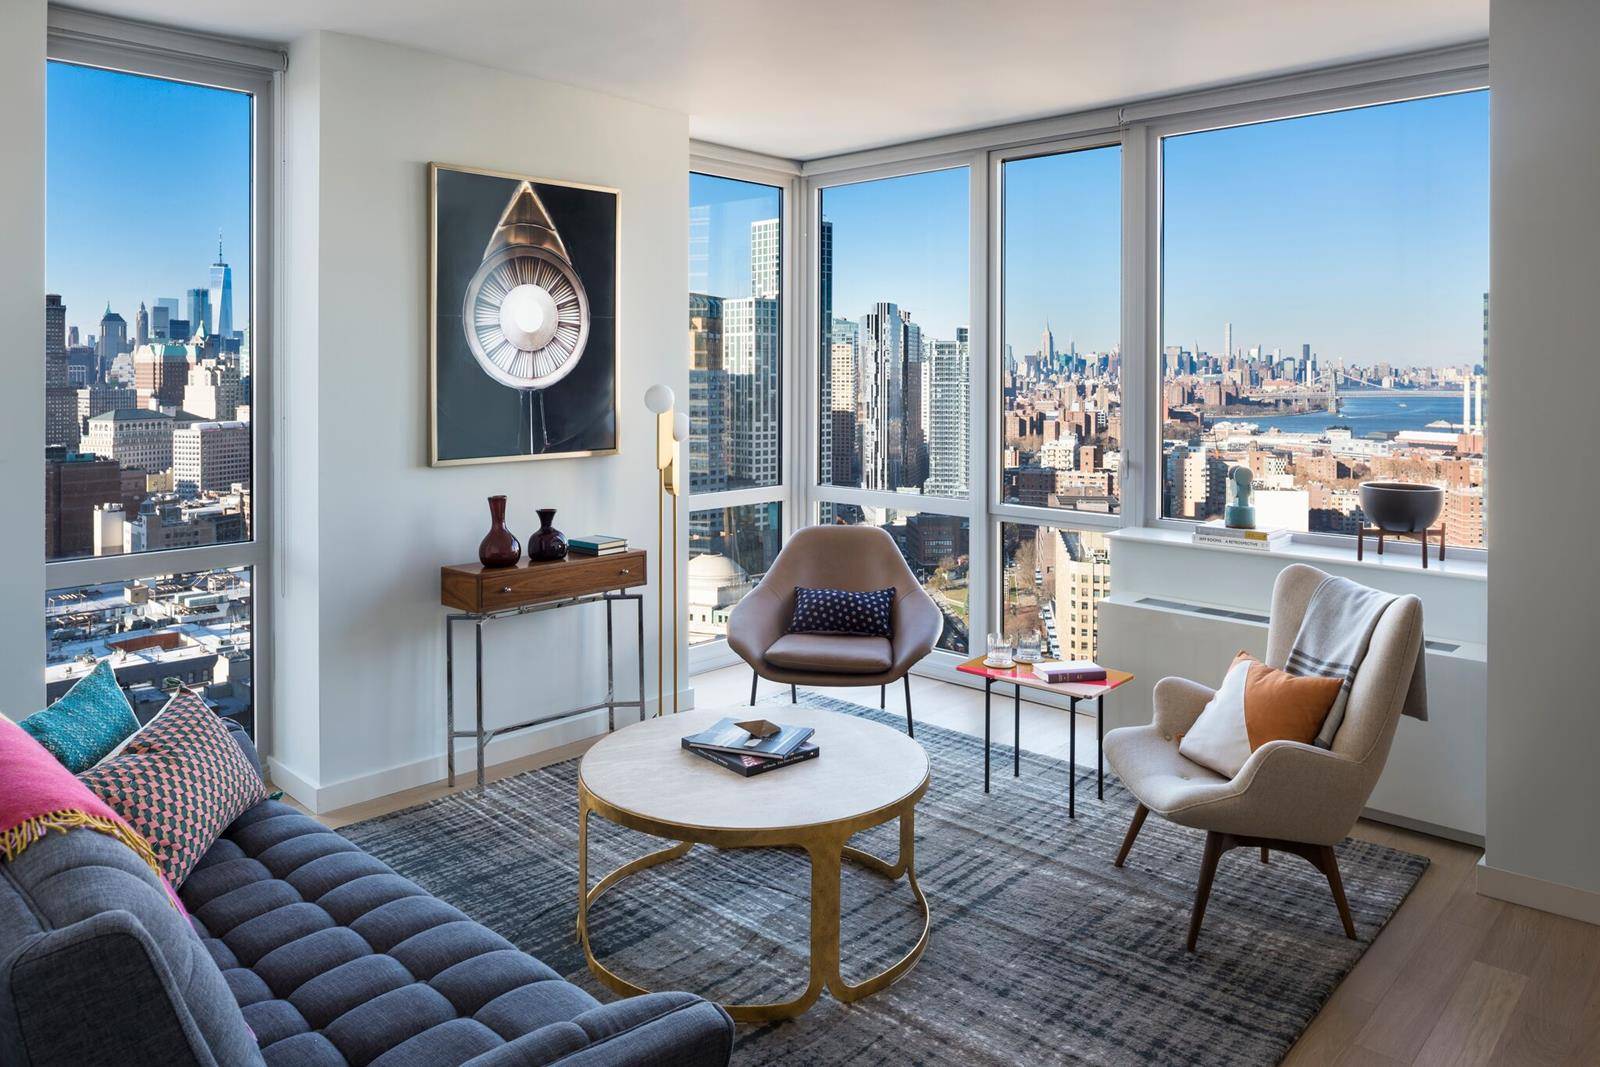 Pricing Reflects Net Effective Rent2 Months Free on a 14 Month LeaseDeveloped by Steiner NYC Hub soars over 600 feet in the air.